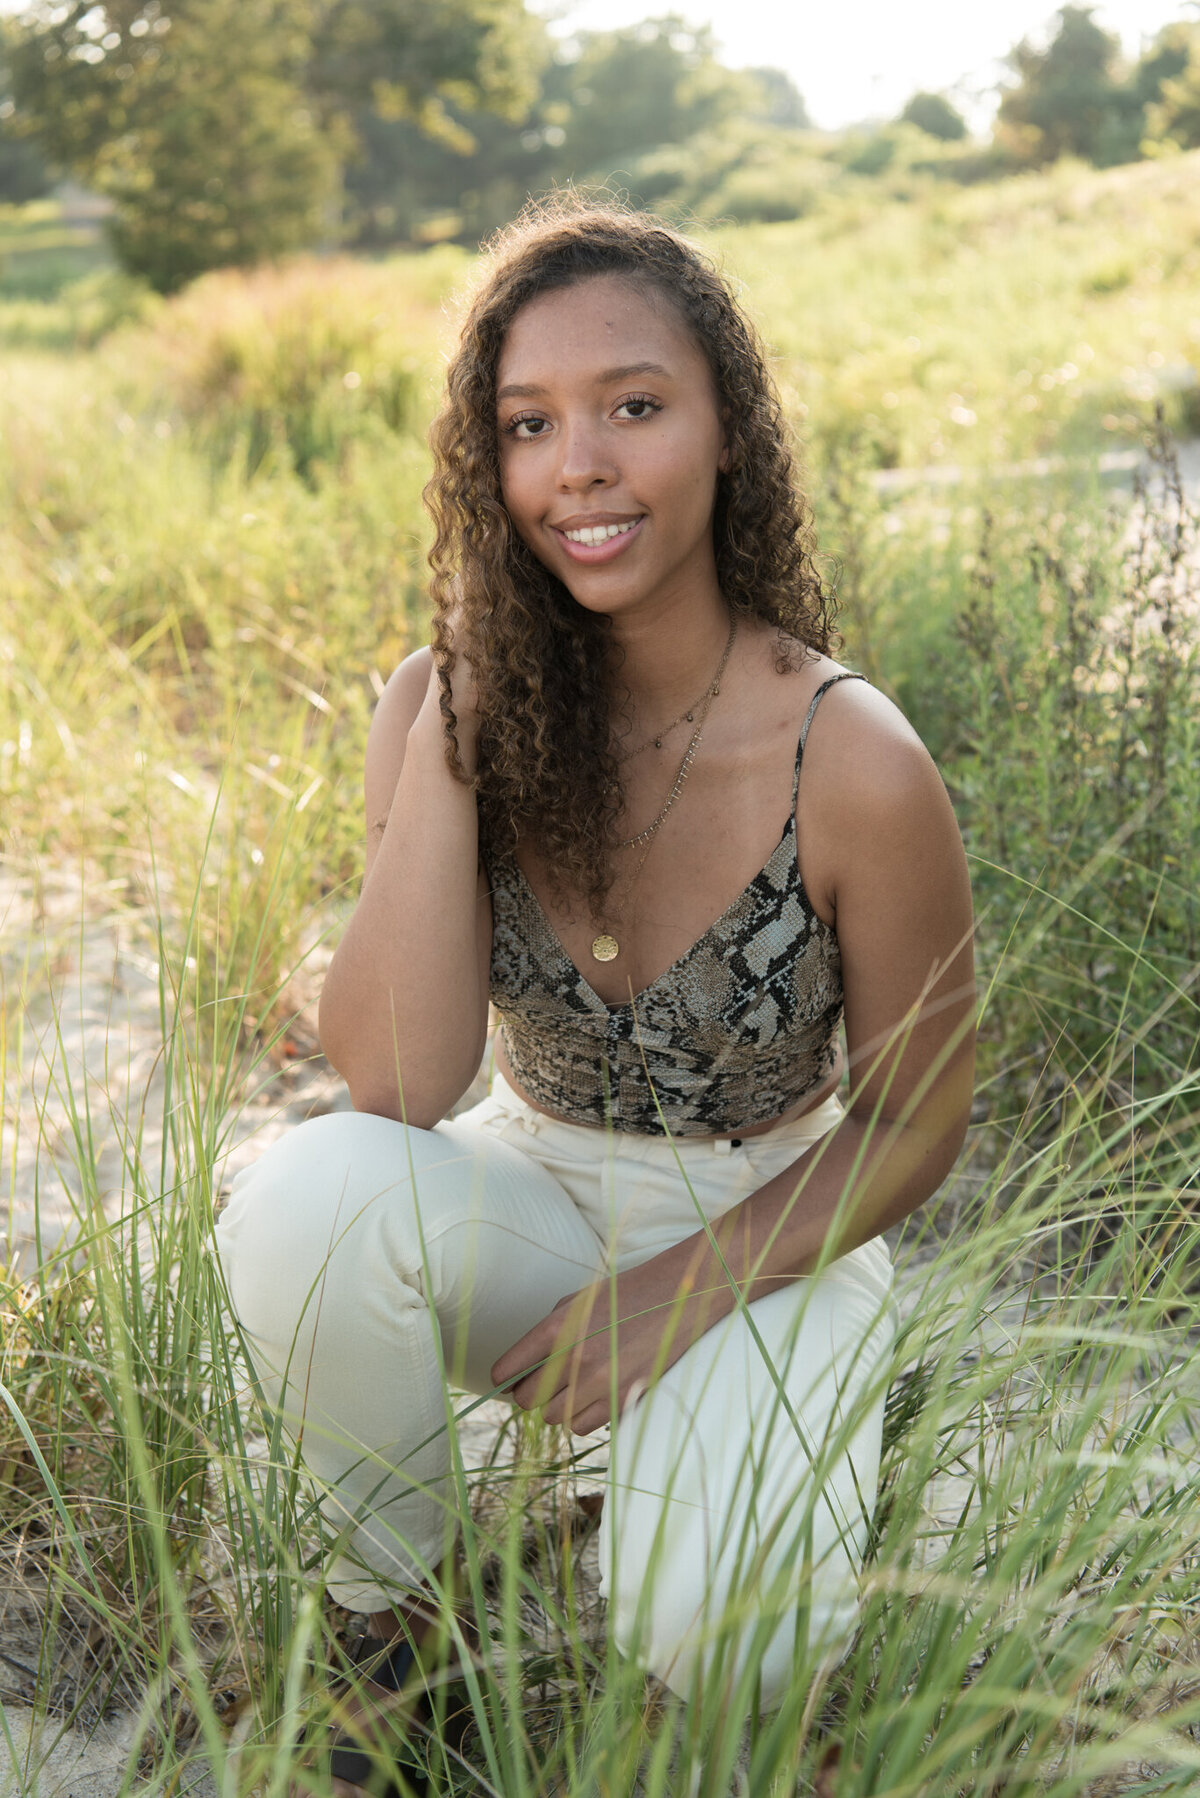 Teen girl squatting in dune grass with white pants and hand in her hair